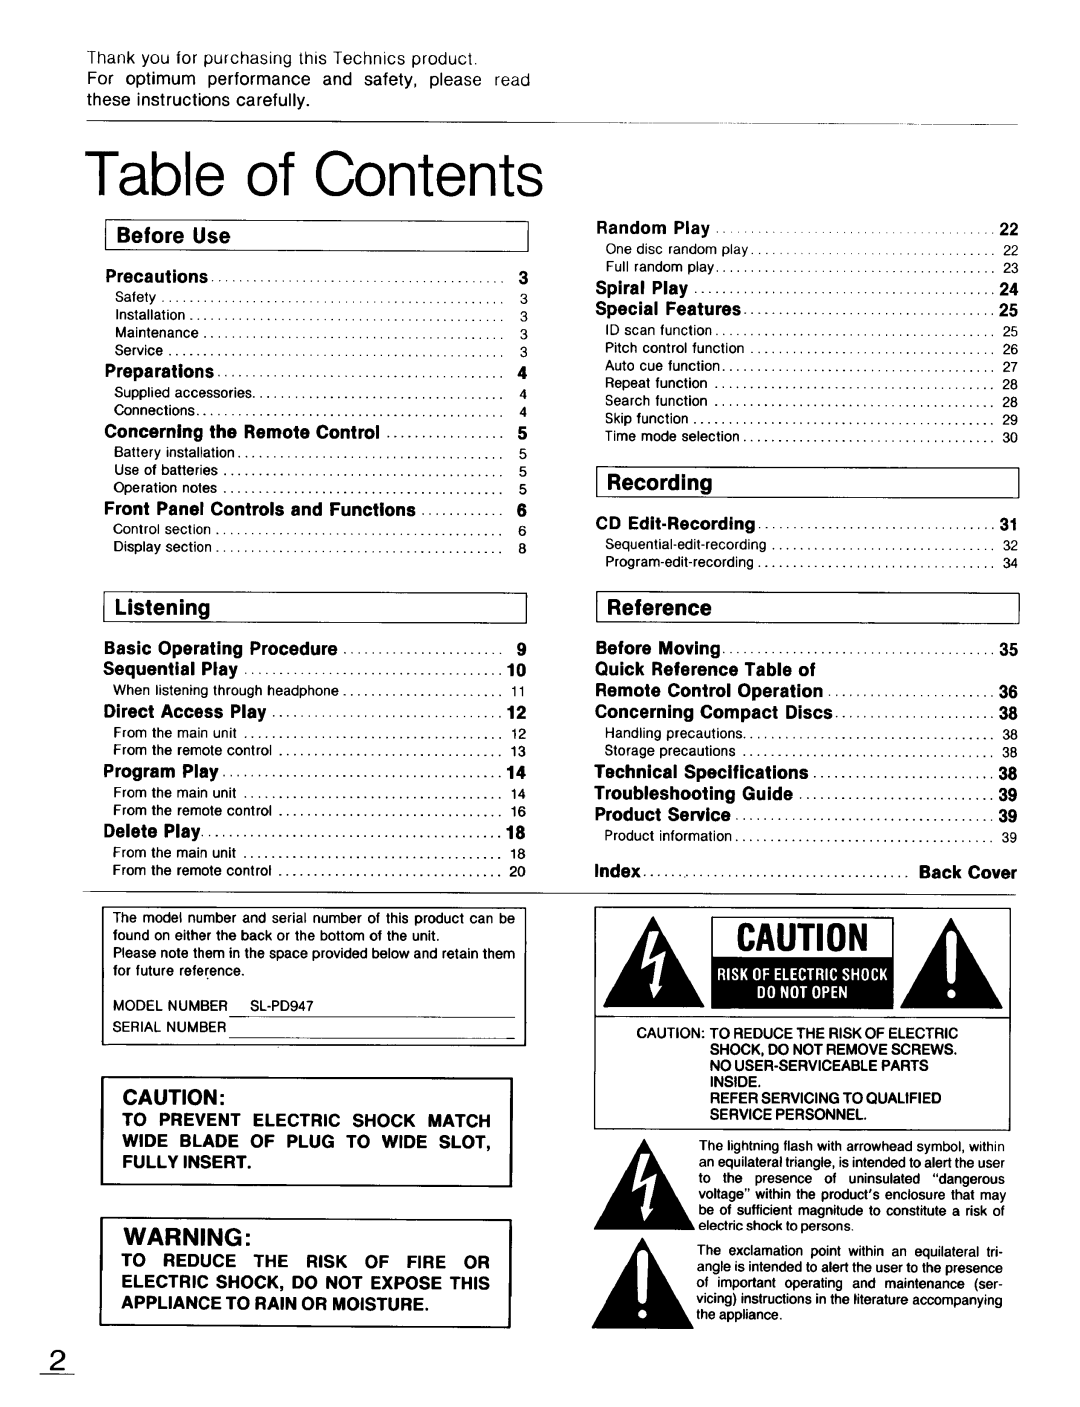 Technics SL-PD947 Table of Contents, I Reference, I Before, Listening, Recording, Precautions, Preparations, Concerning 